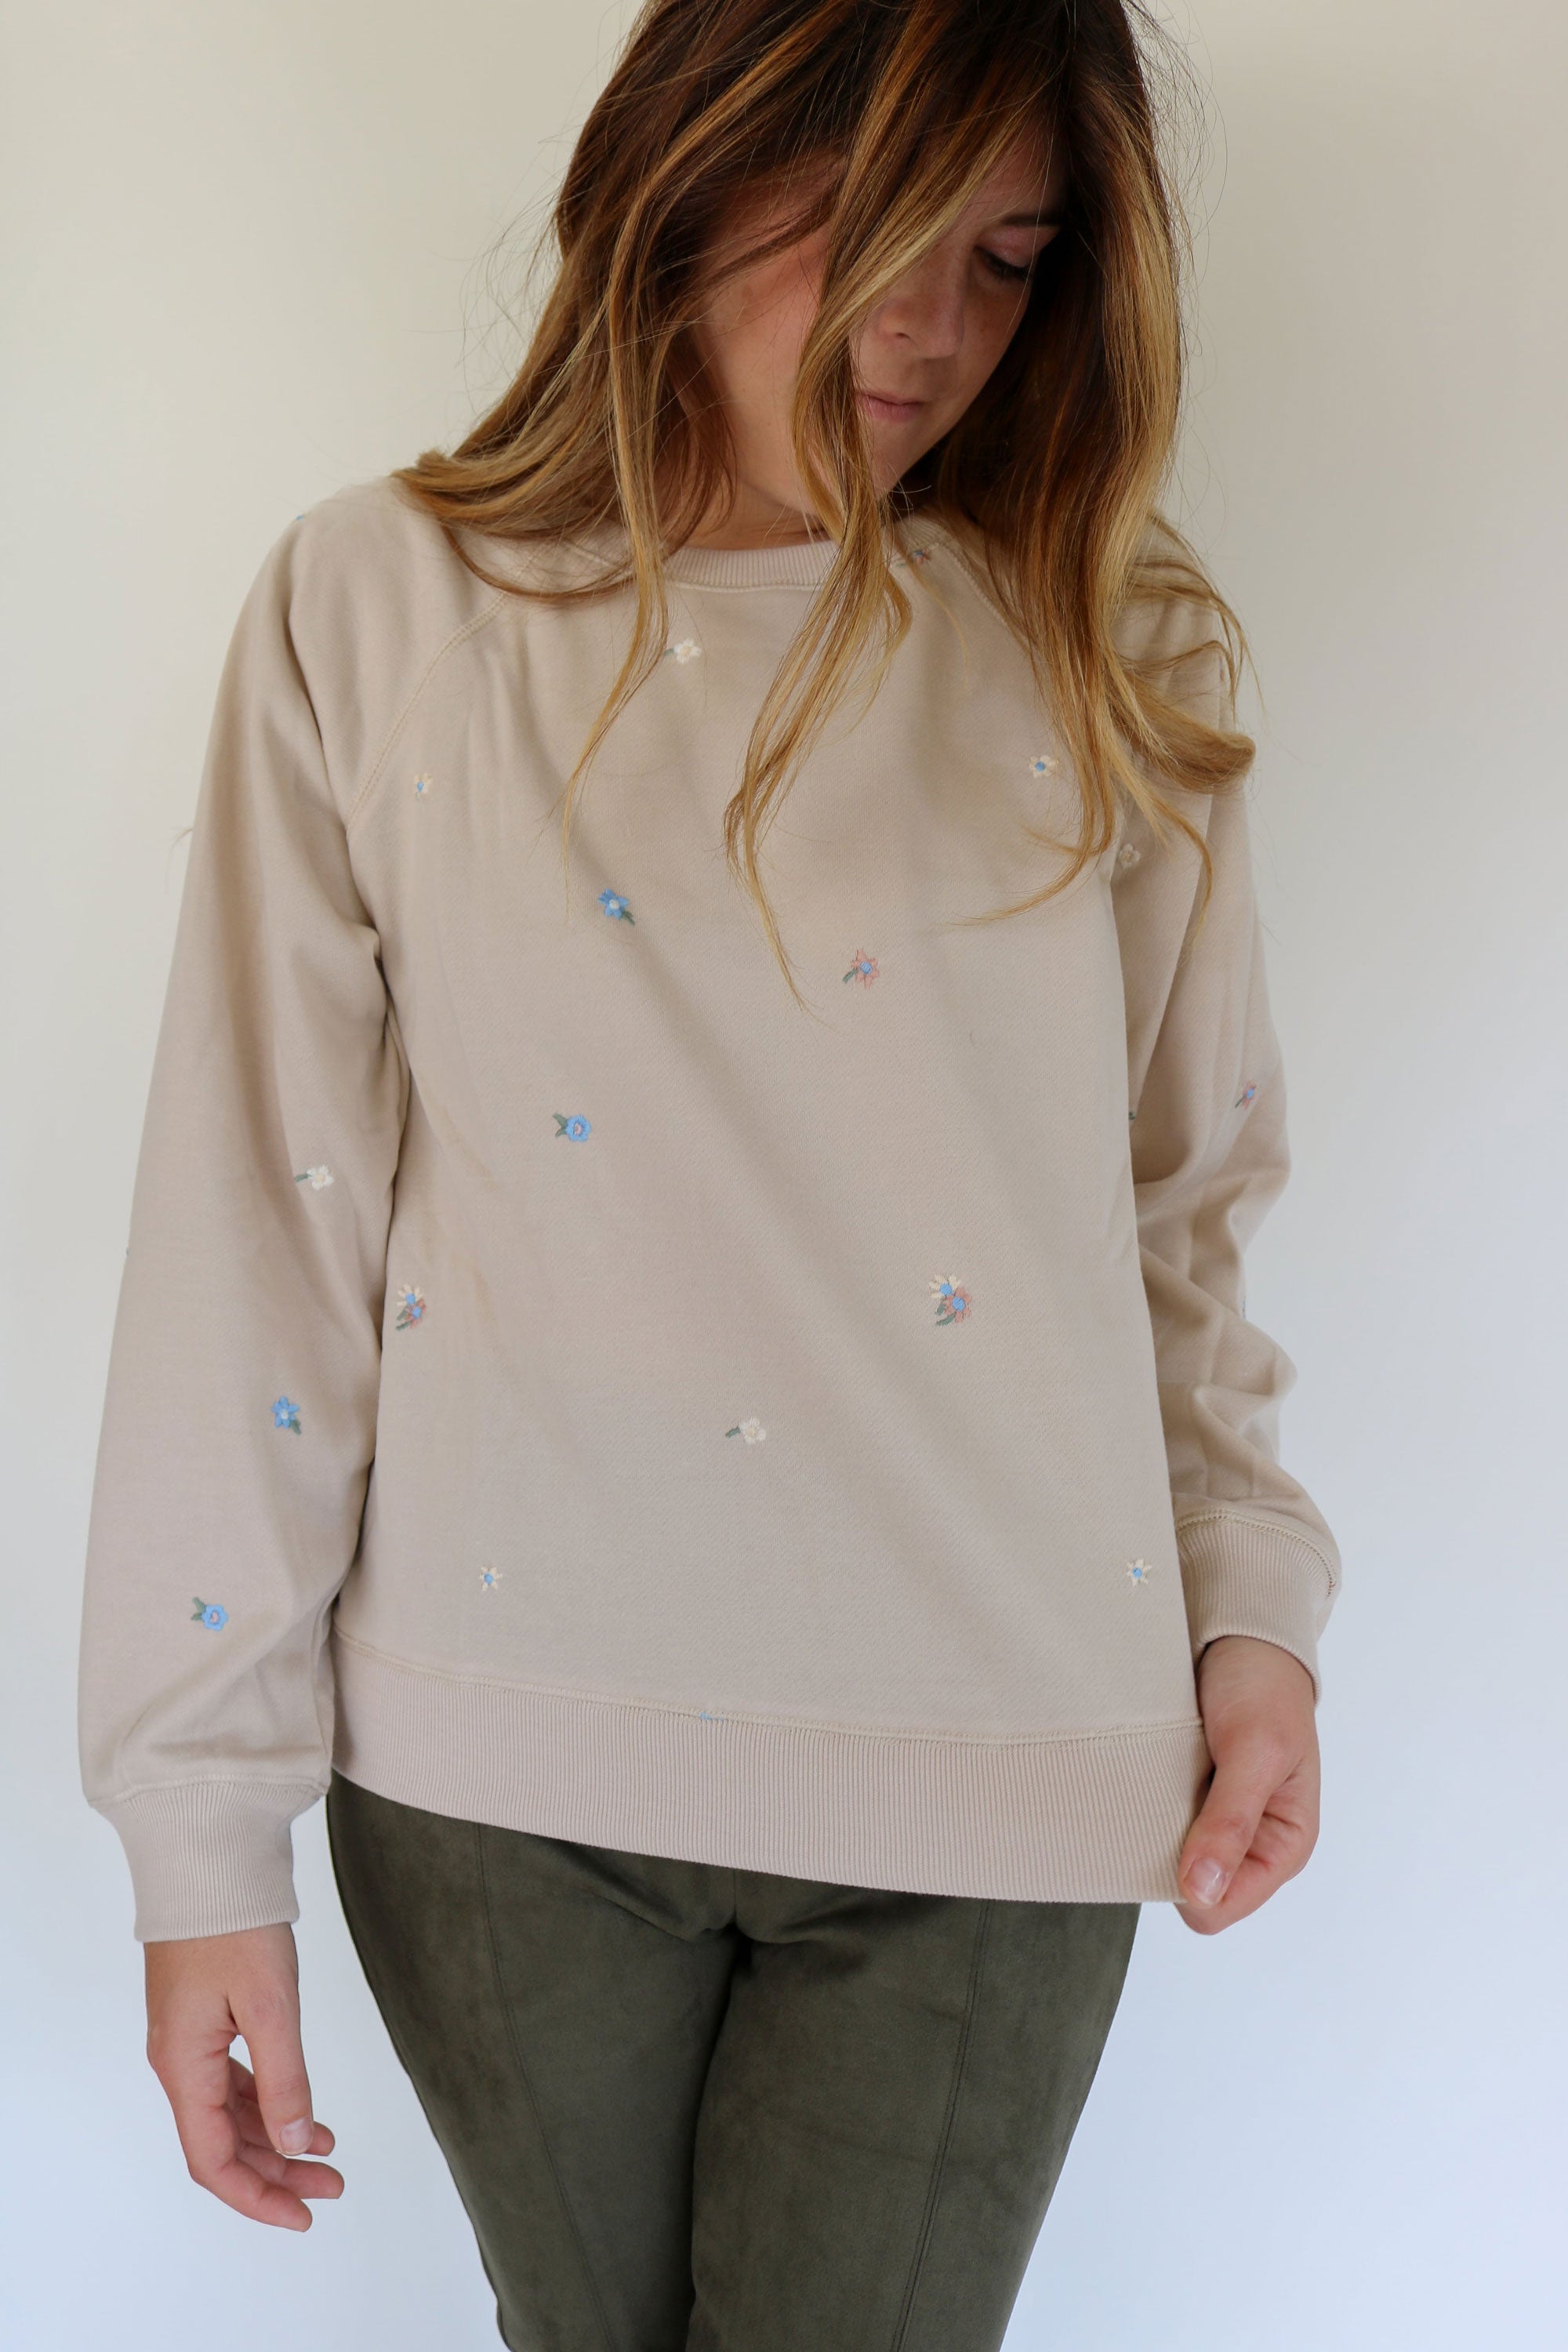 Floral Embroidered Sweatshirt in Taupe